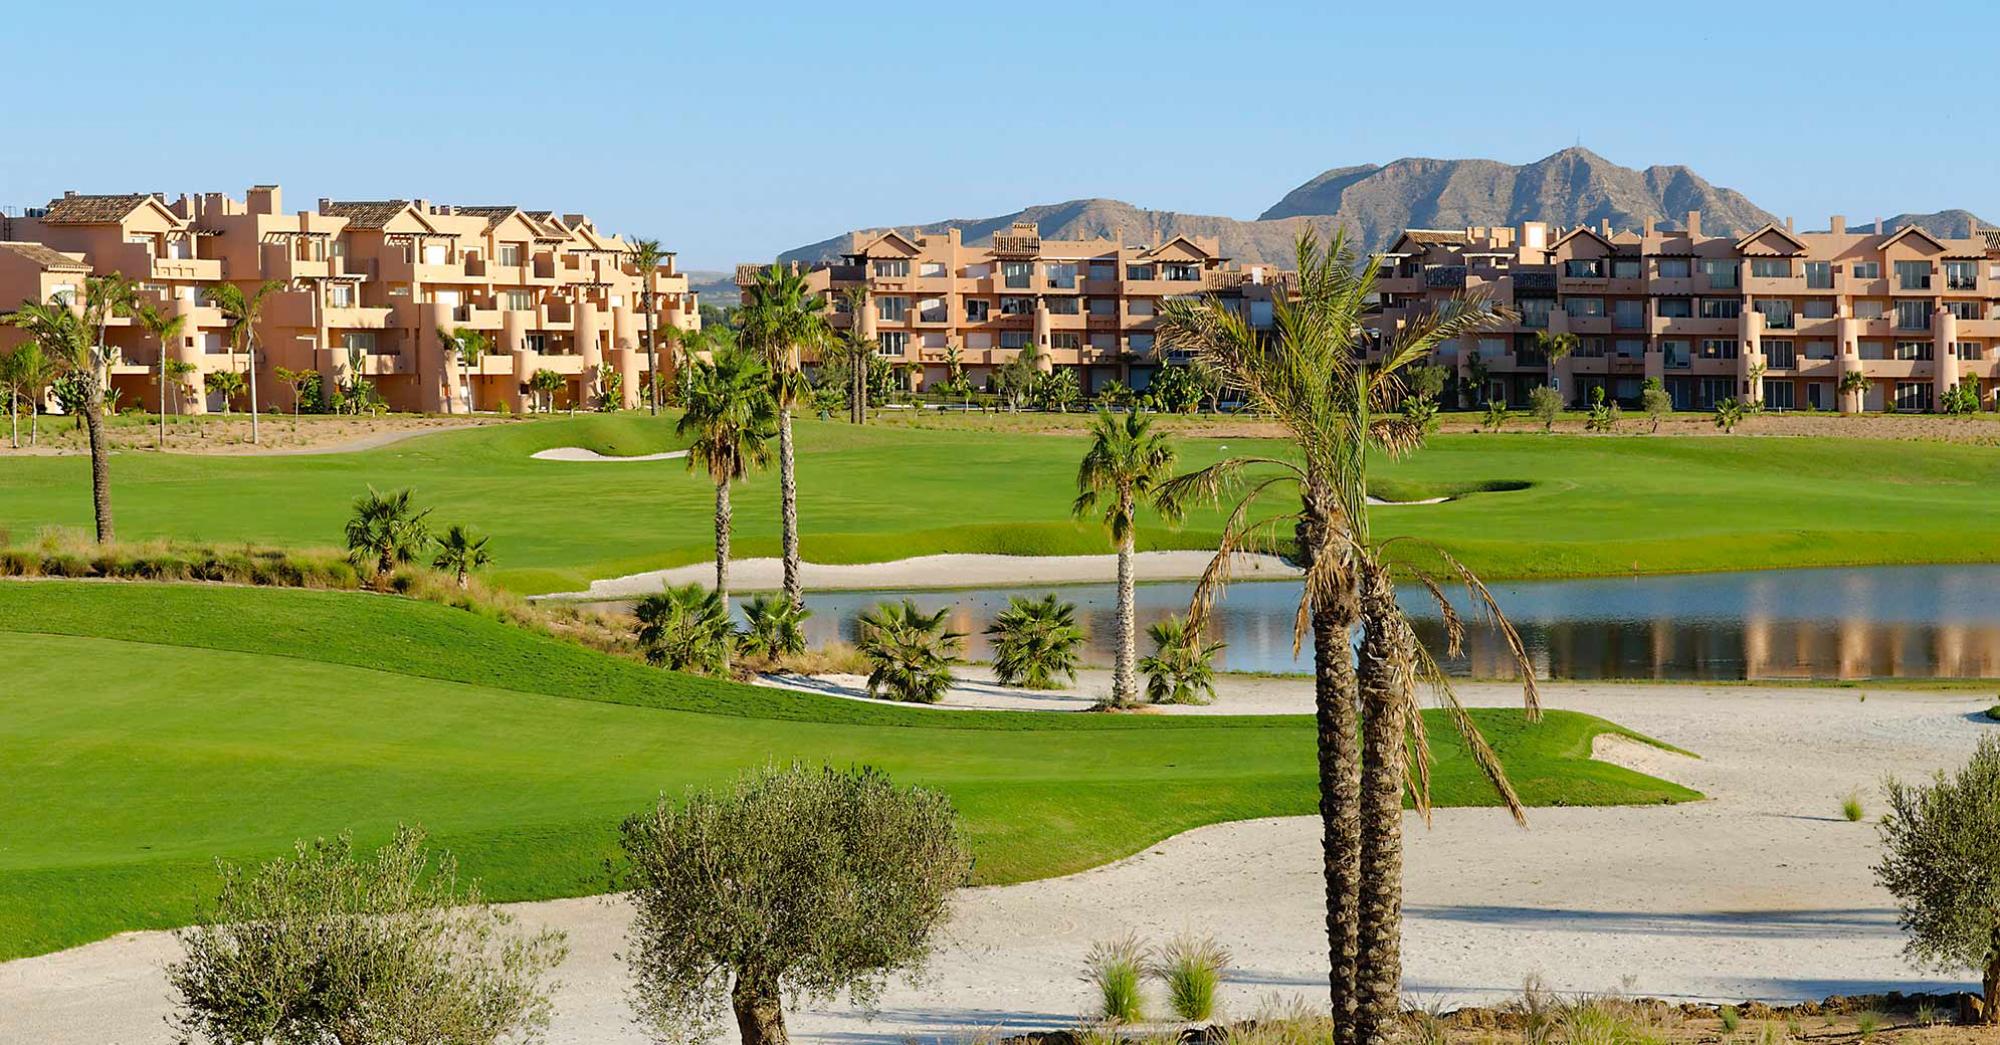 View Mar Menor Golf Course's lovely golf course in marvelous Costa Blanca.